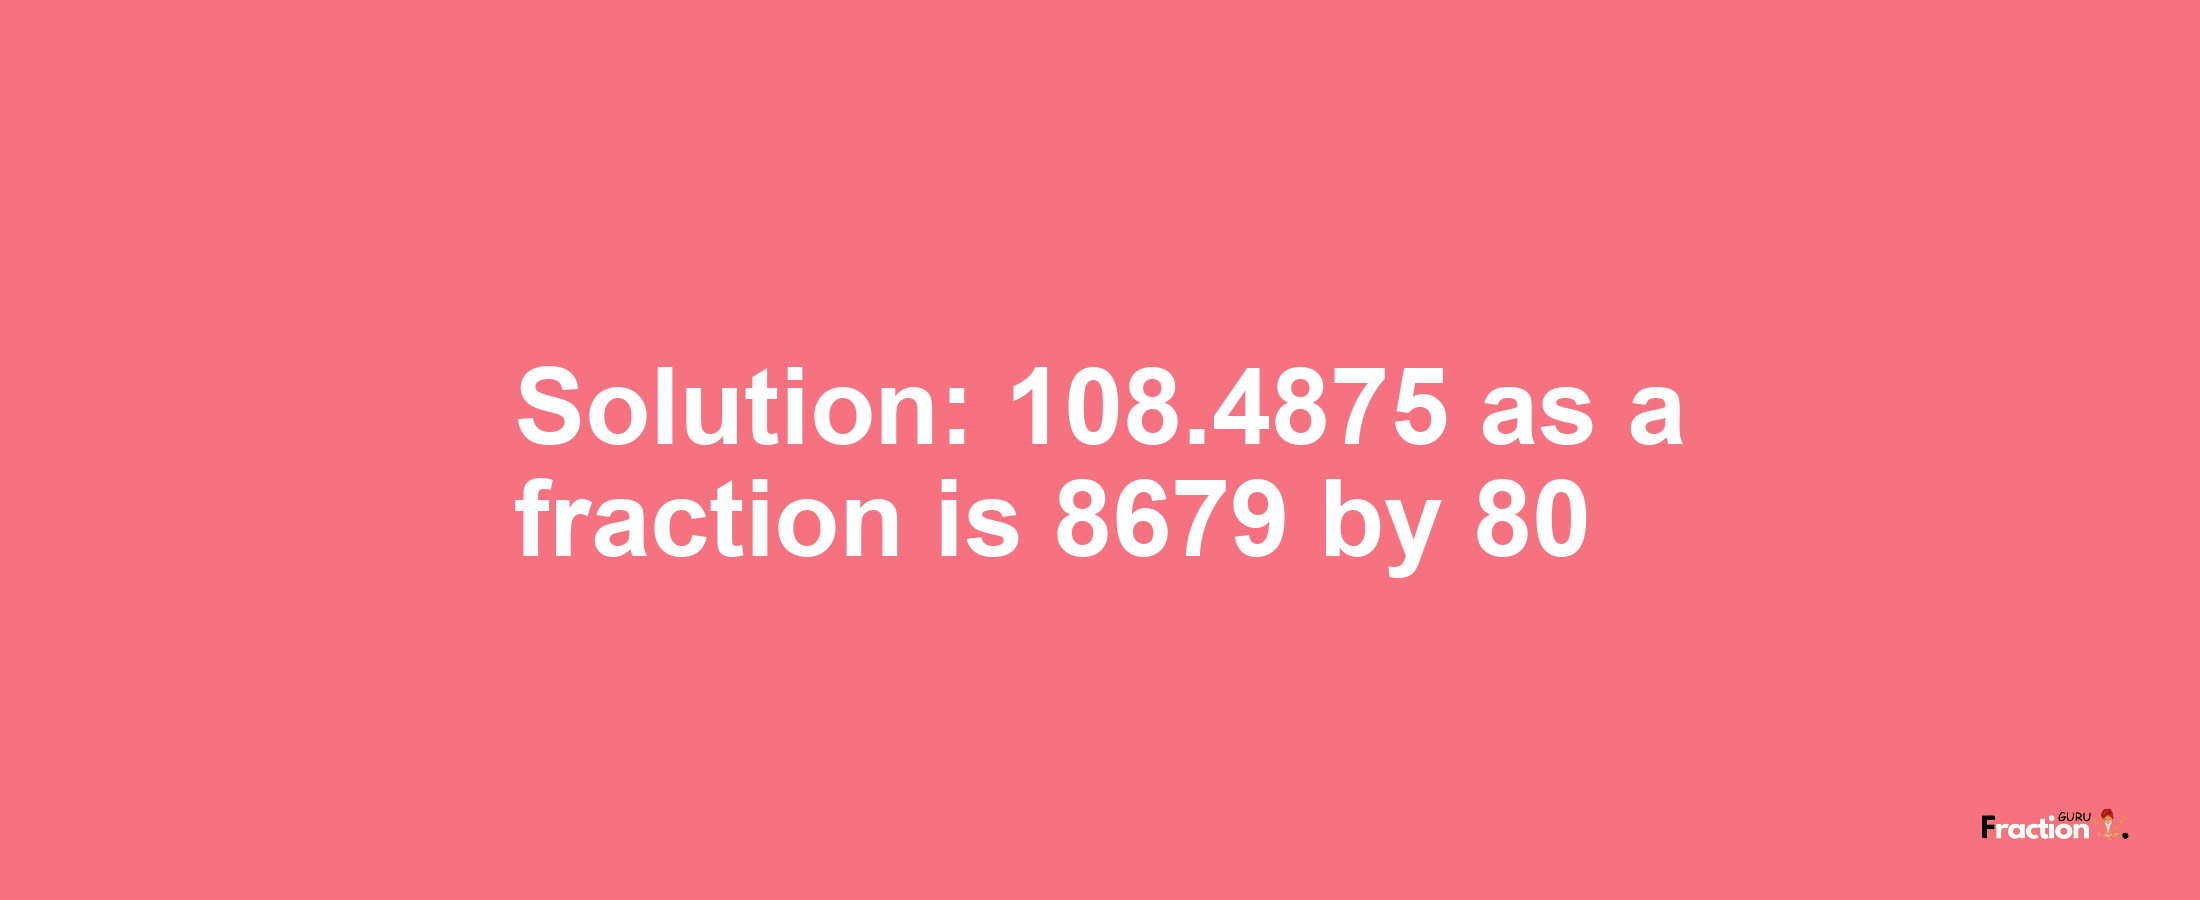 Solution:108.4875 as a fraction is 8679/80